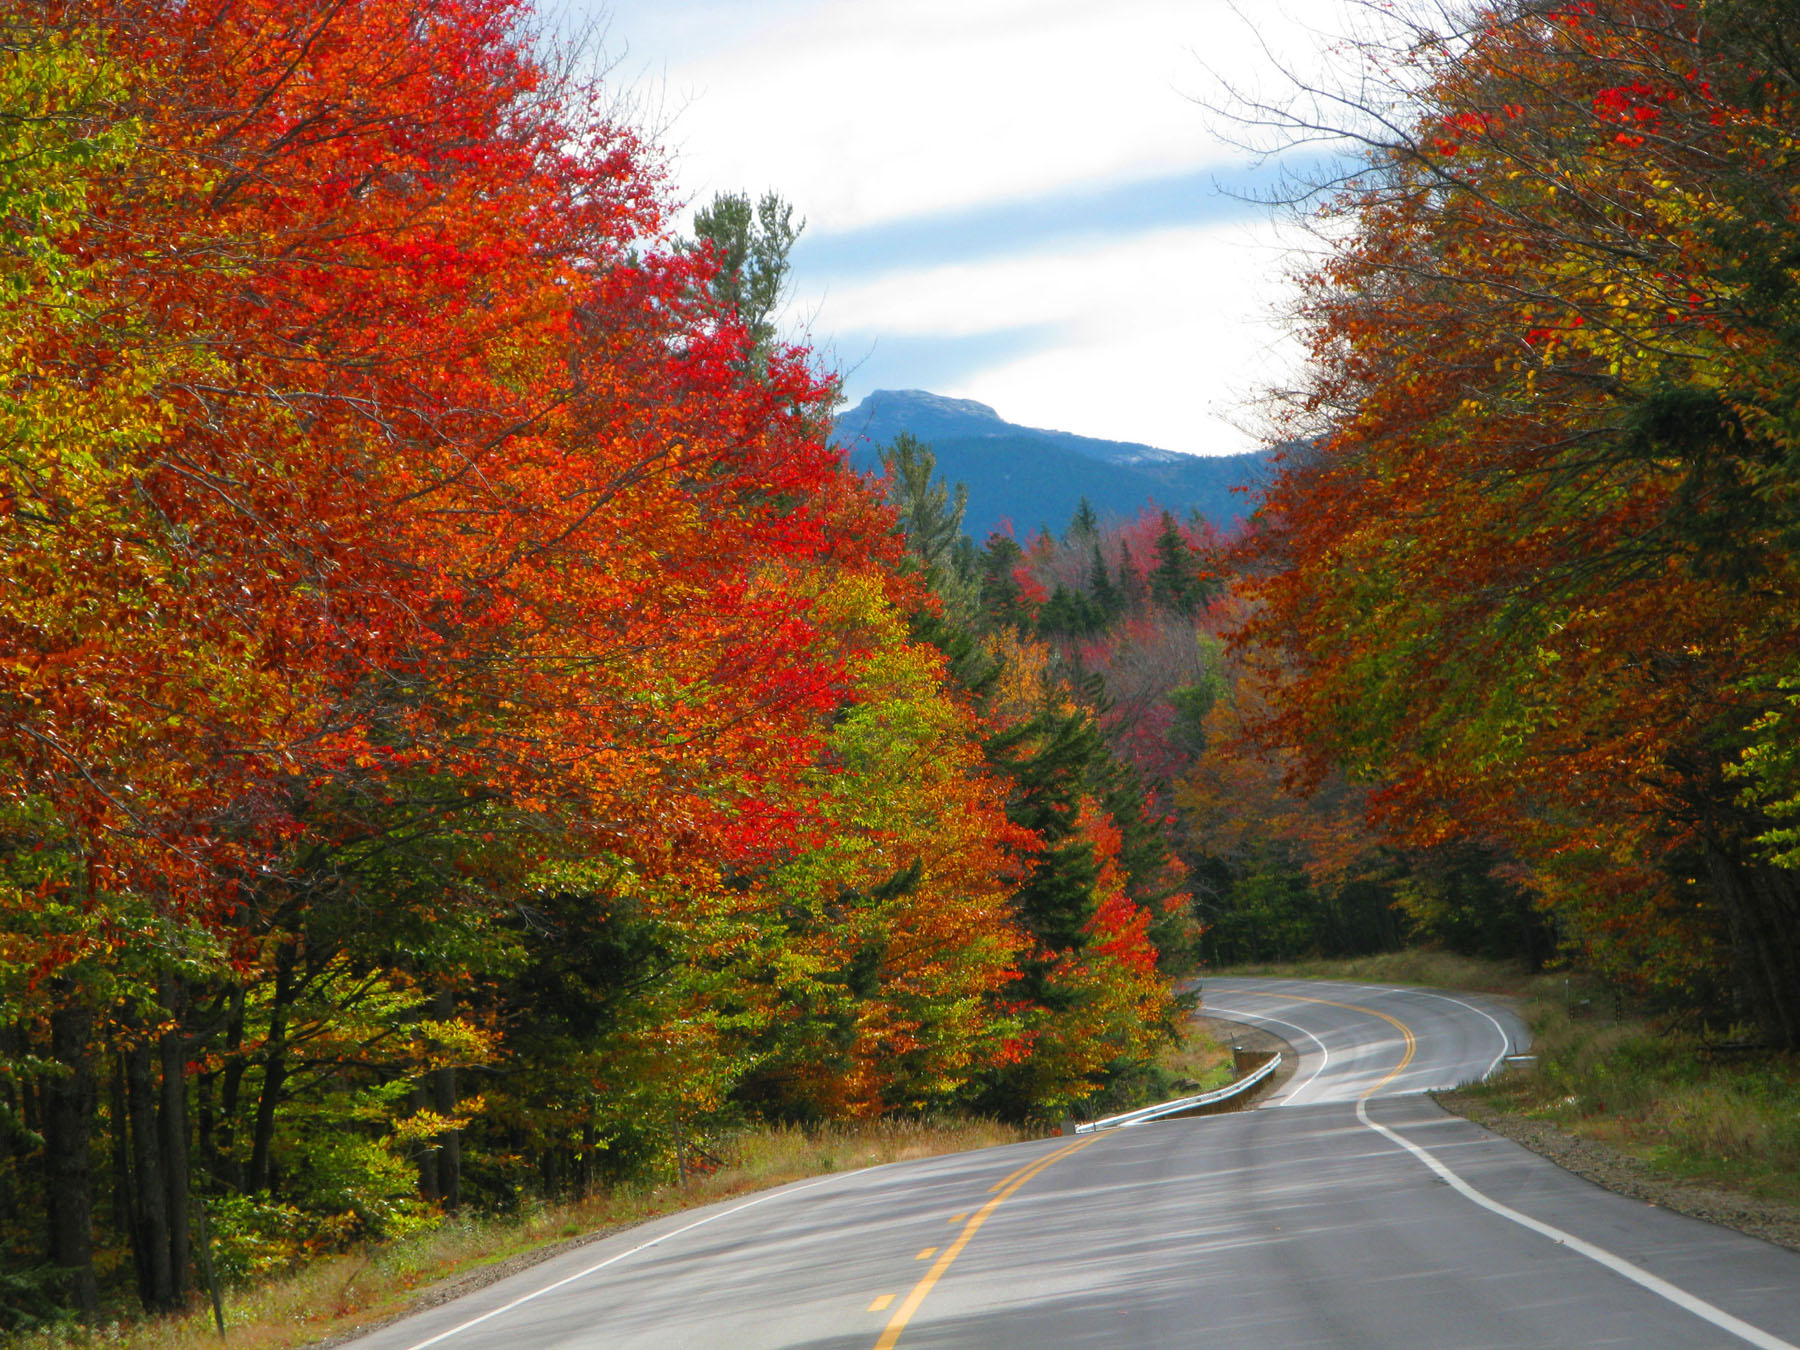 Fall colors make the Kancamagus Highway an incredible fall destination. Photo courtesy of Ellen Edersheim/White Mountains Attractions.